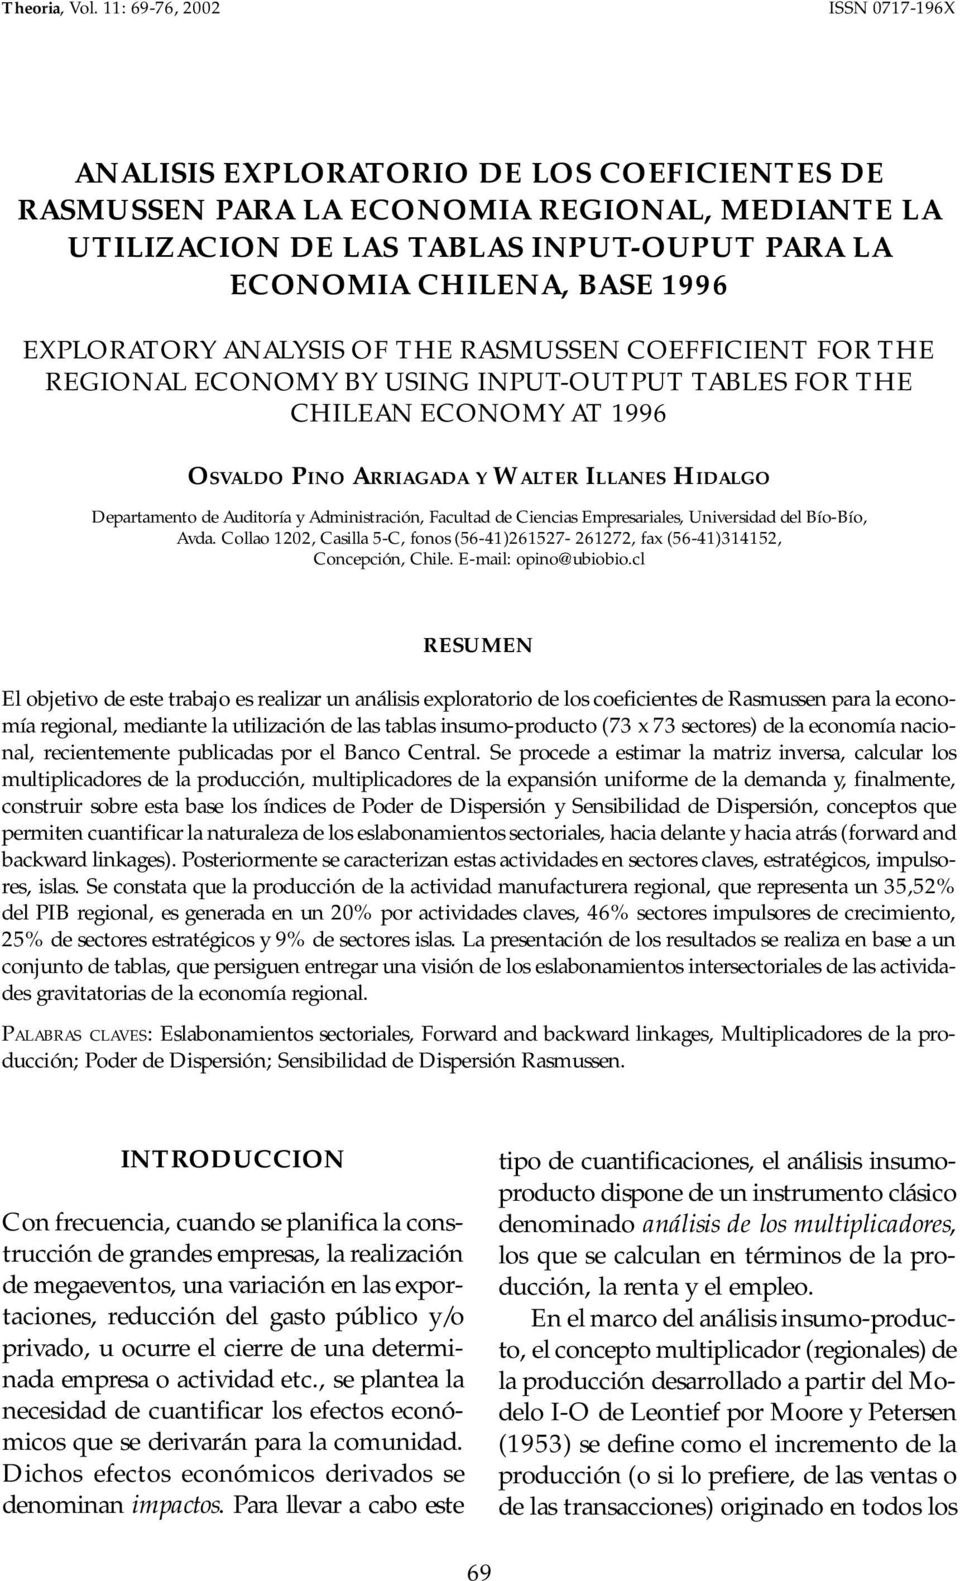 EXPLORATORY ANALYSIS OF THE RASMUSSEN COEFFICIENT FOR THE REGIONAL ECONOMY BY USING INPUT-OUTPUT TABLES FOR THE CHILEAN ECONOMY AT 996 OSVALDO PINO ARRIAGADA Y WALTER ILLANES HIDALGO Departamento de